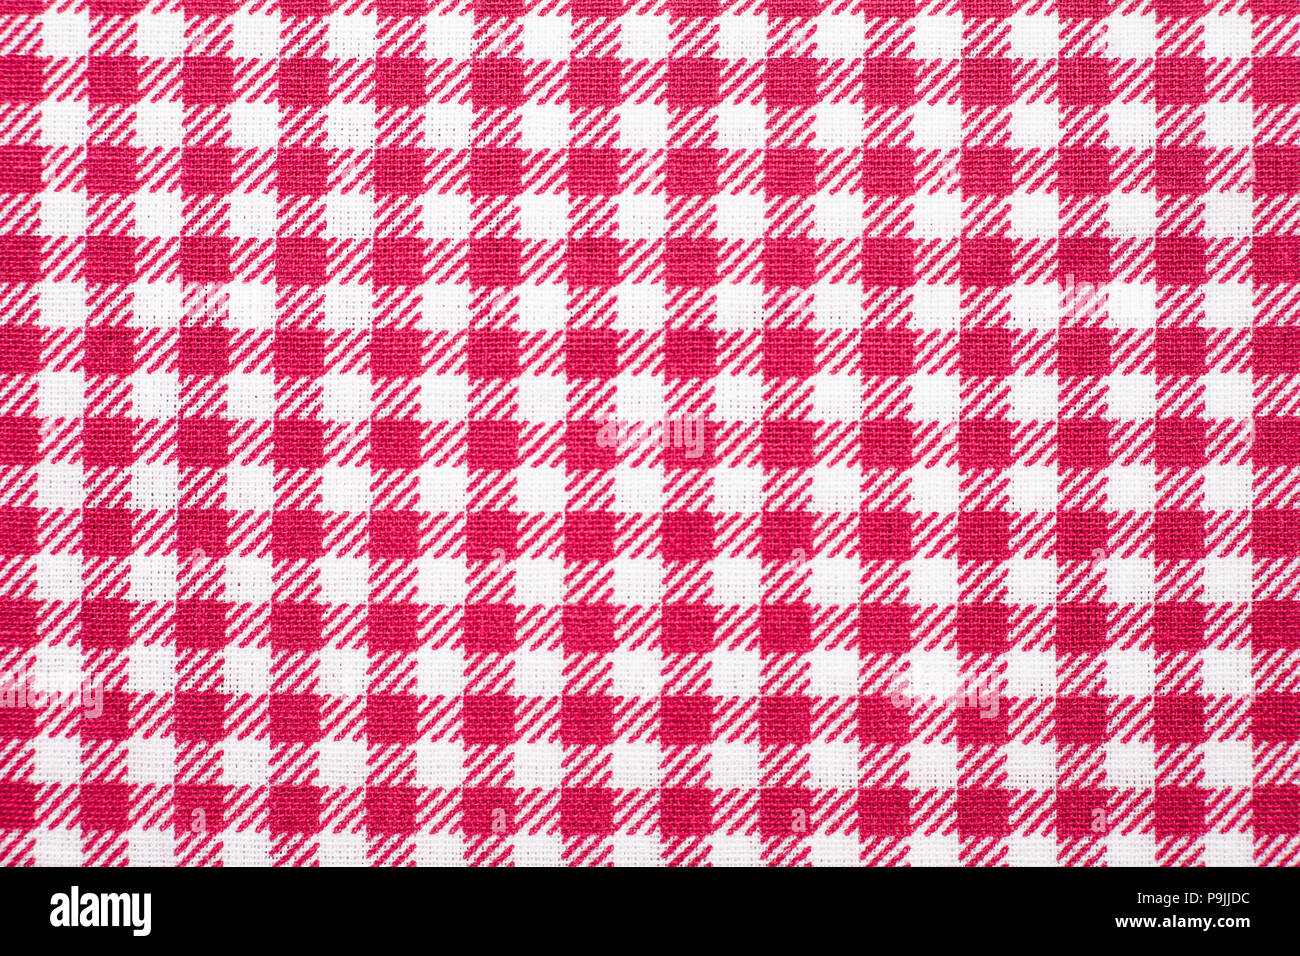 Tablecloth checkered red and white texture background, Napkin in Stock Photo